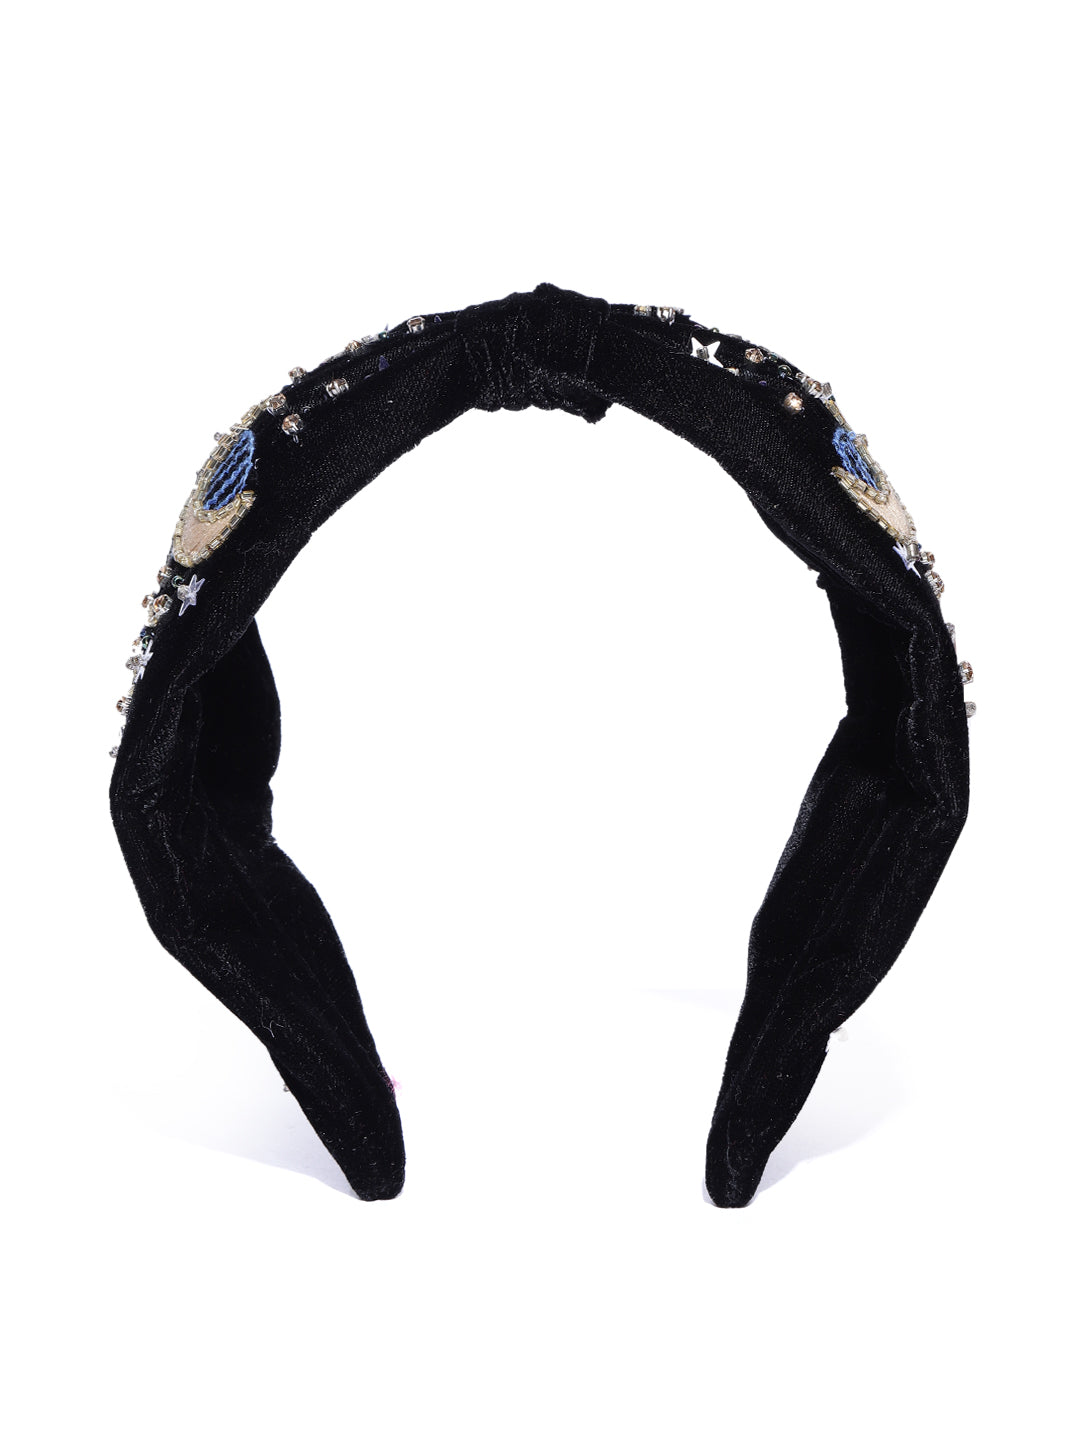 Blueberry black velvet hand beaded and stone embellished with embroidery knot hairband